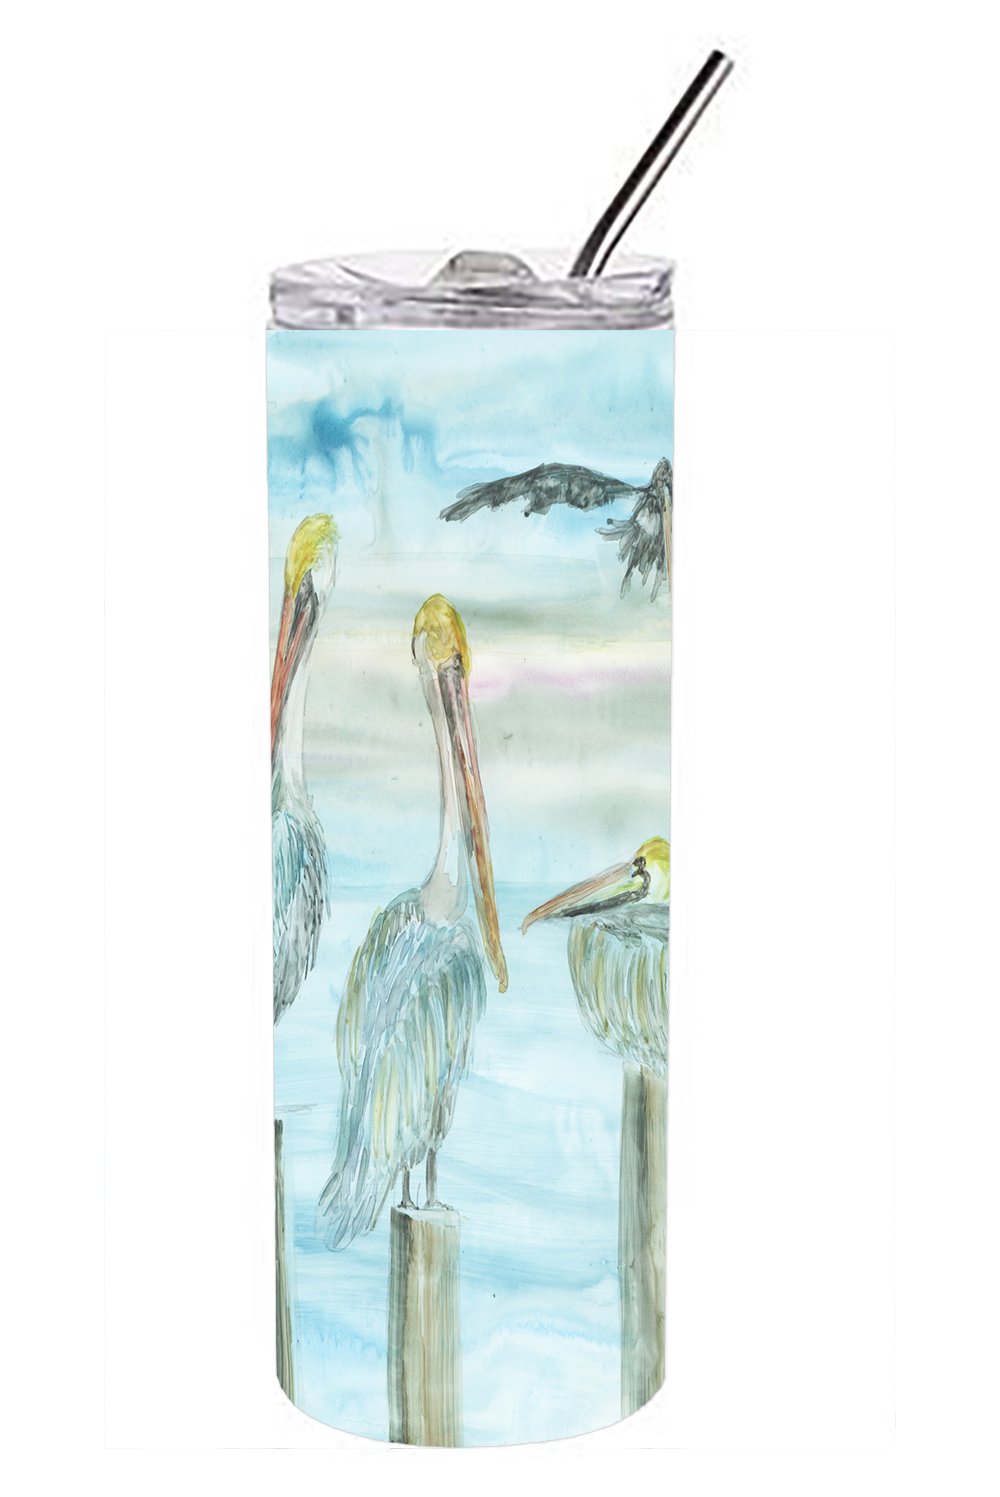 Pelicans in Blue Double Walled Stainless Steel 20 oz Skinny Tumbler SC2035TBL20 by Caroline's Treasures